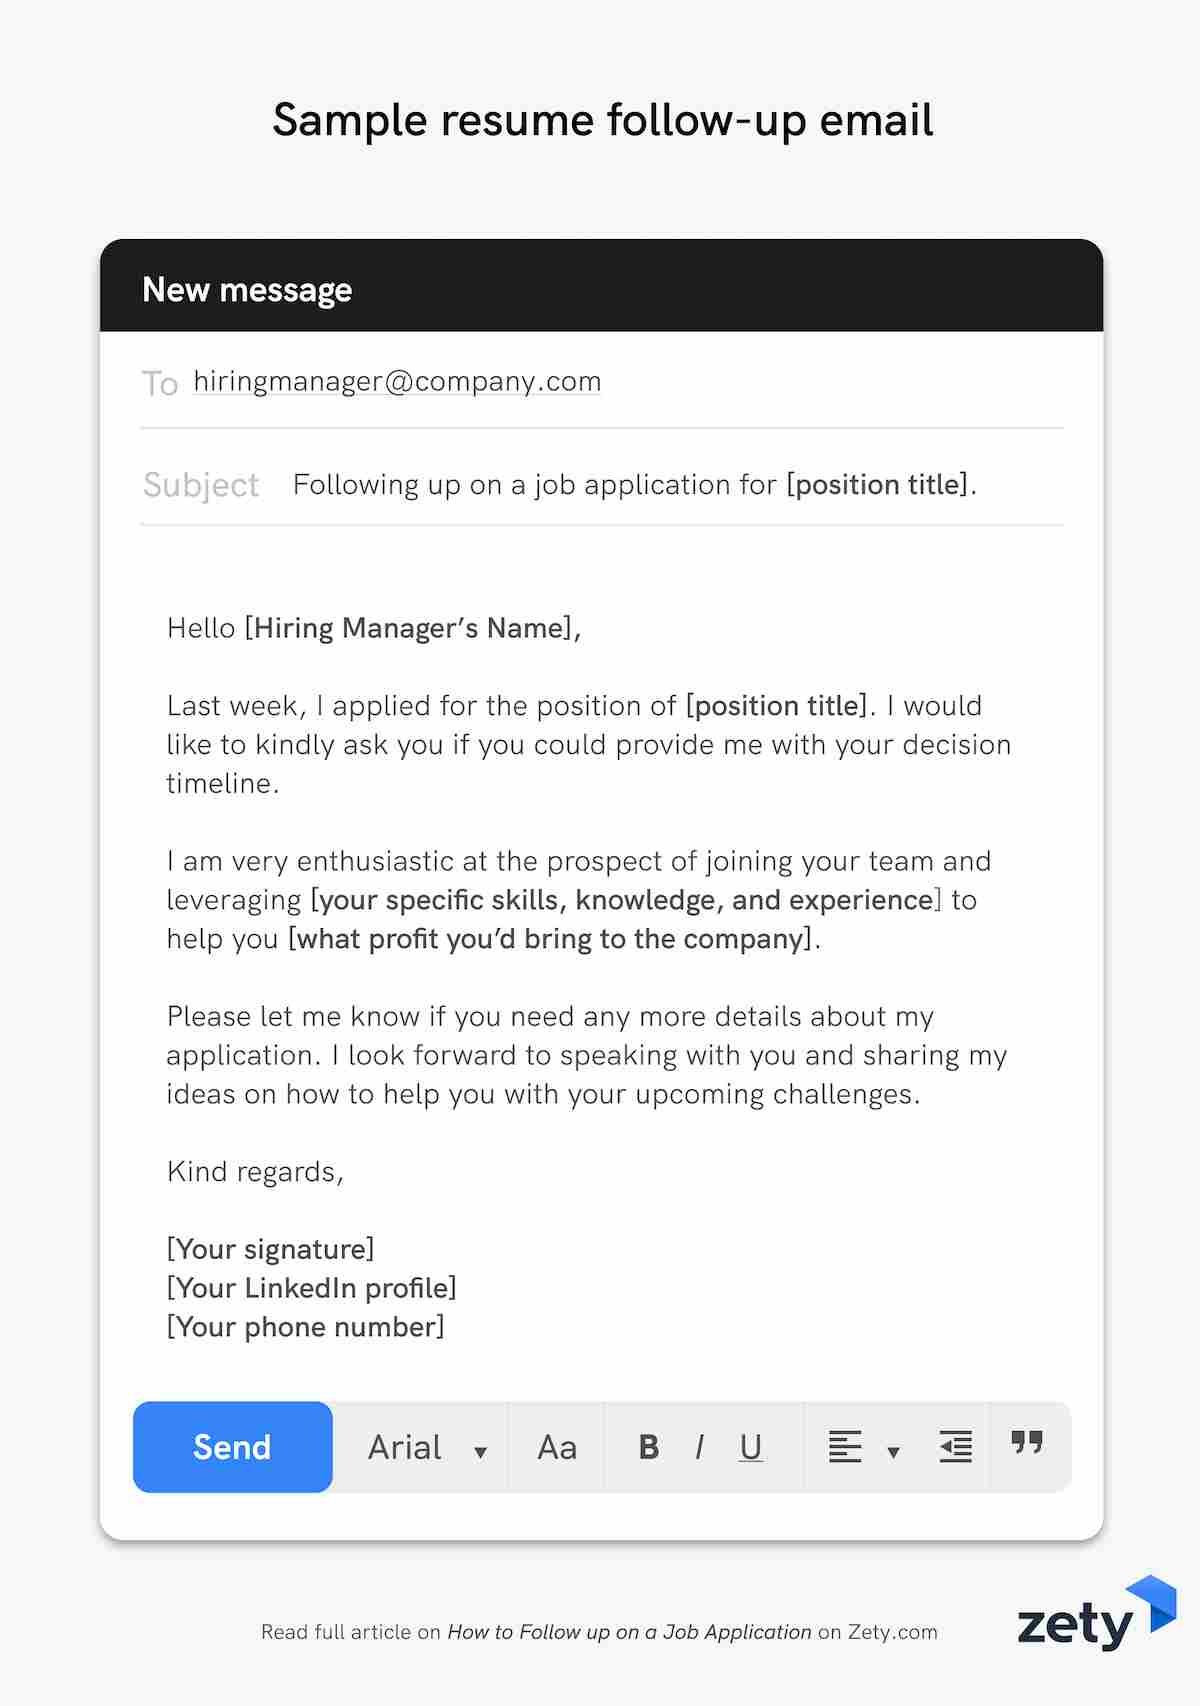 Sample Email for Job Inquiry with Resume How to Follow Up On A Job Application (with Email Sample)